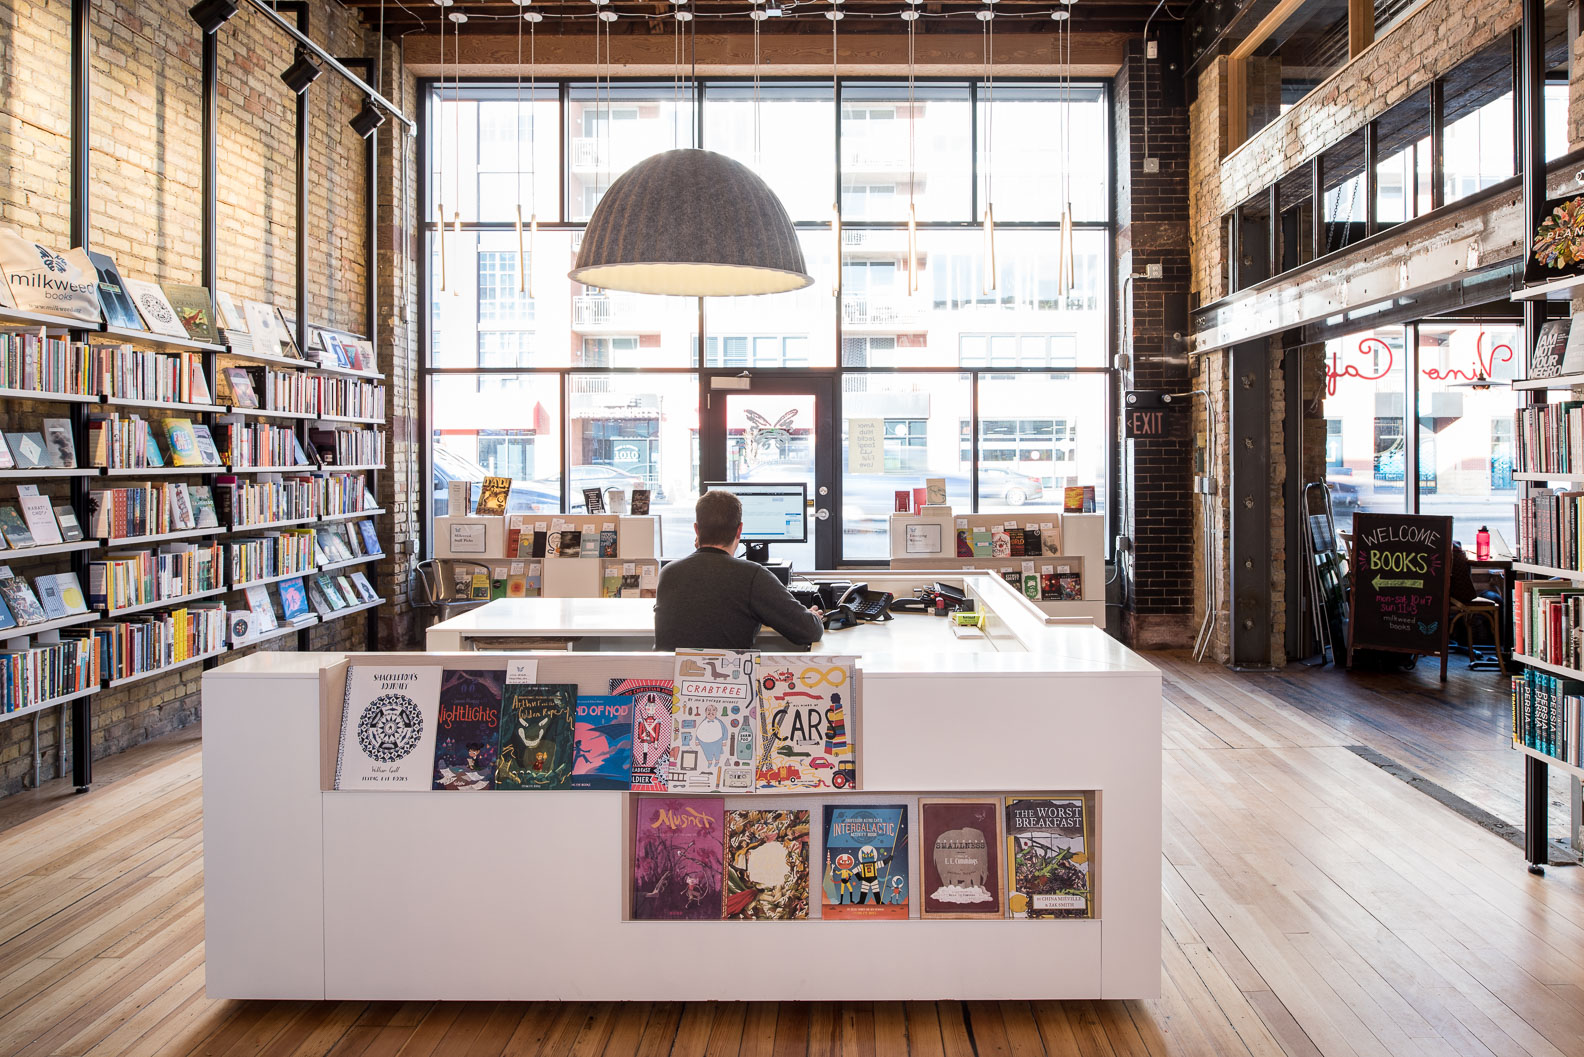 modern bookstore in historic building milkweed bookstore in minneapolis designed by christian dean architecture